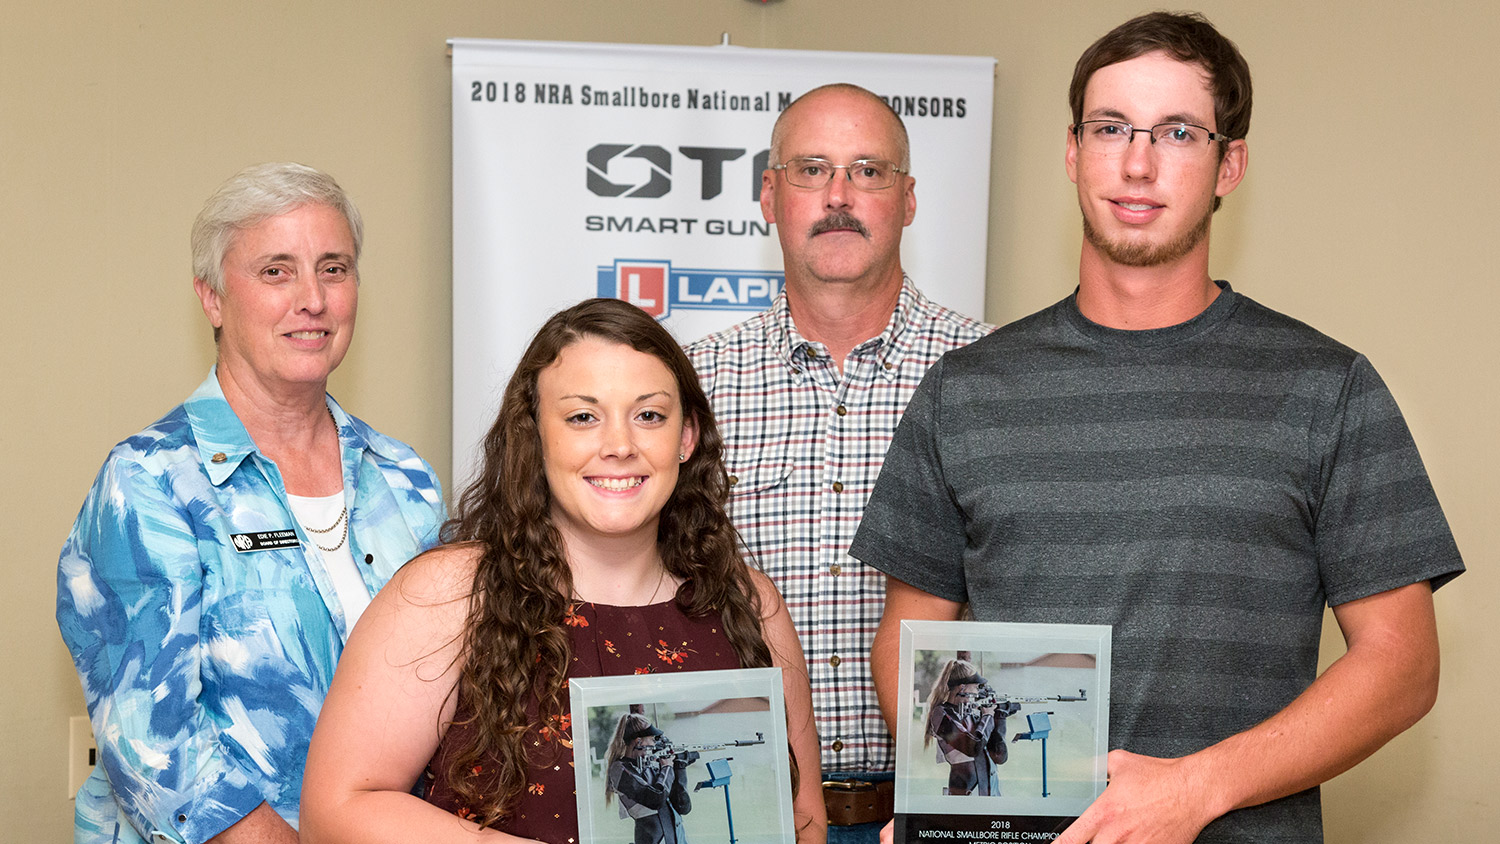 2018 NRA Smallbore Metric Position Any Sights Team Champions